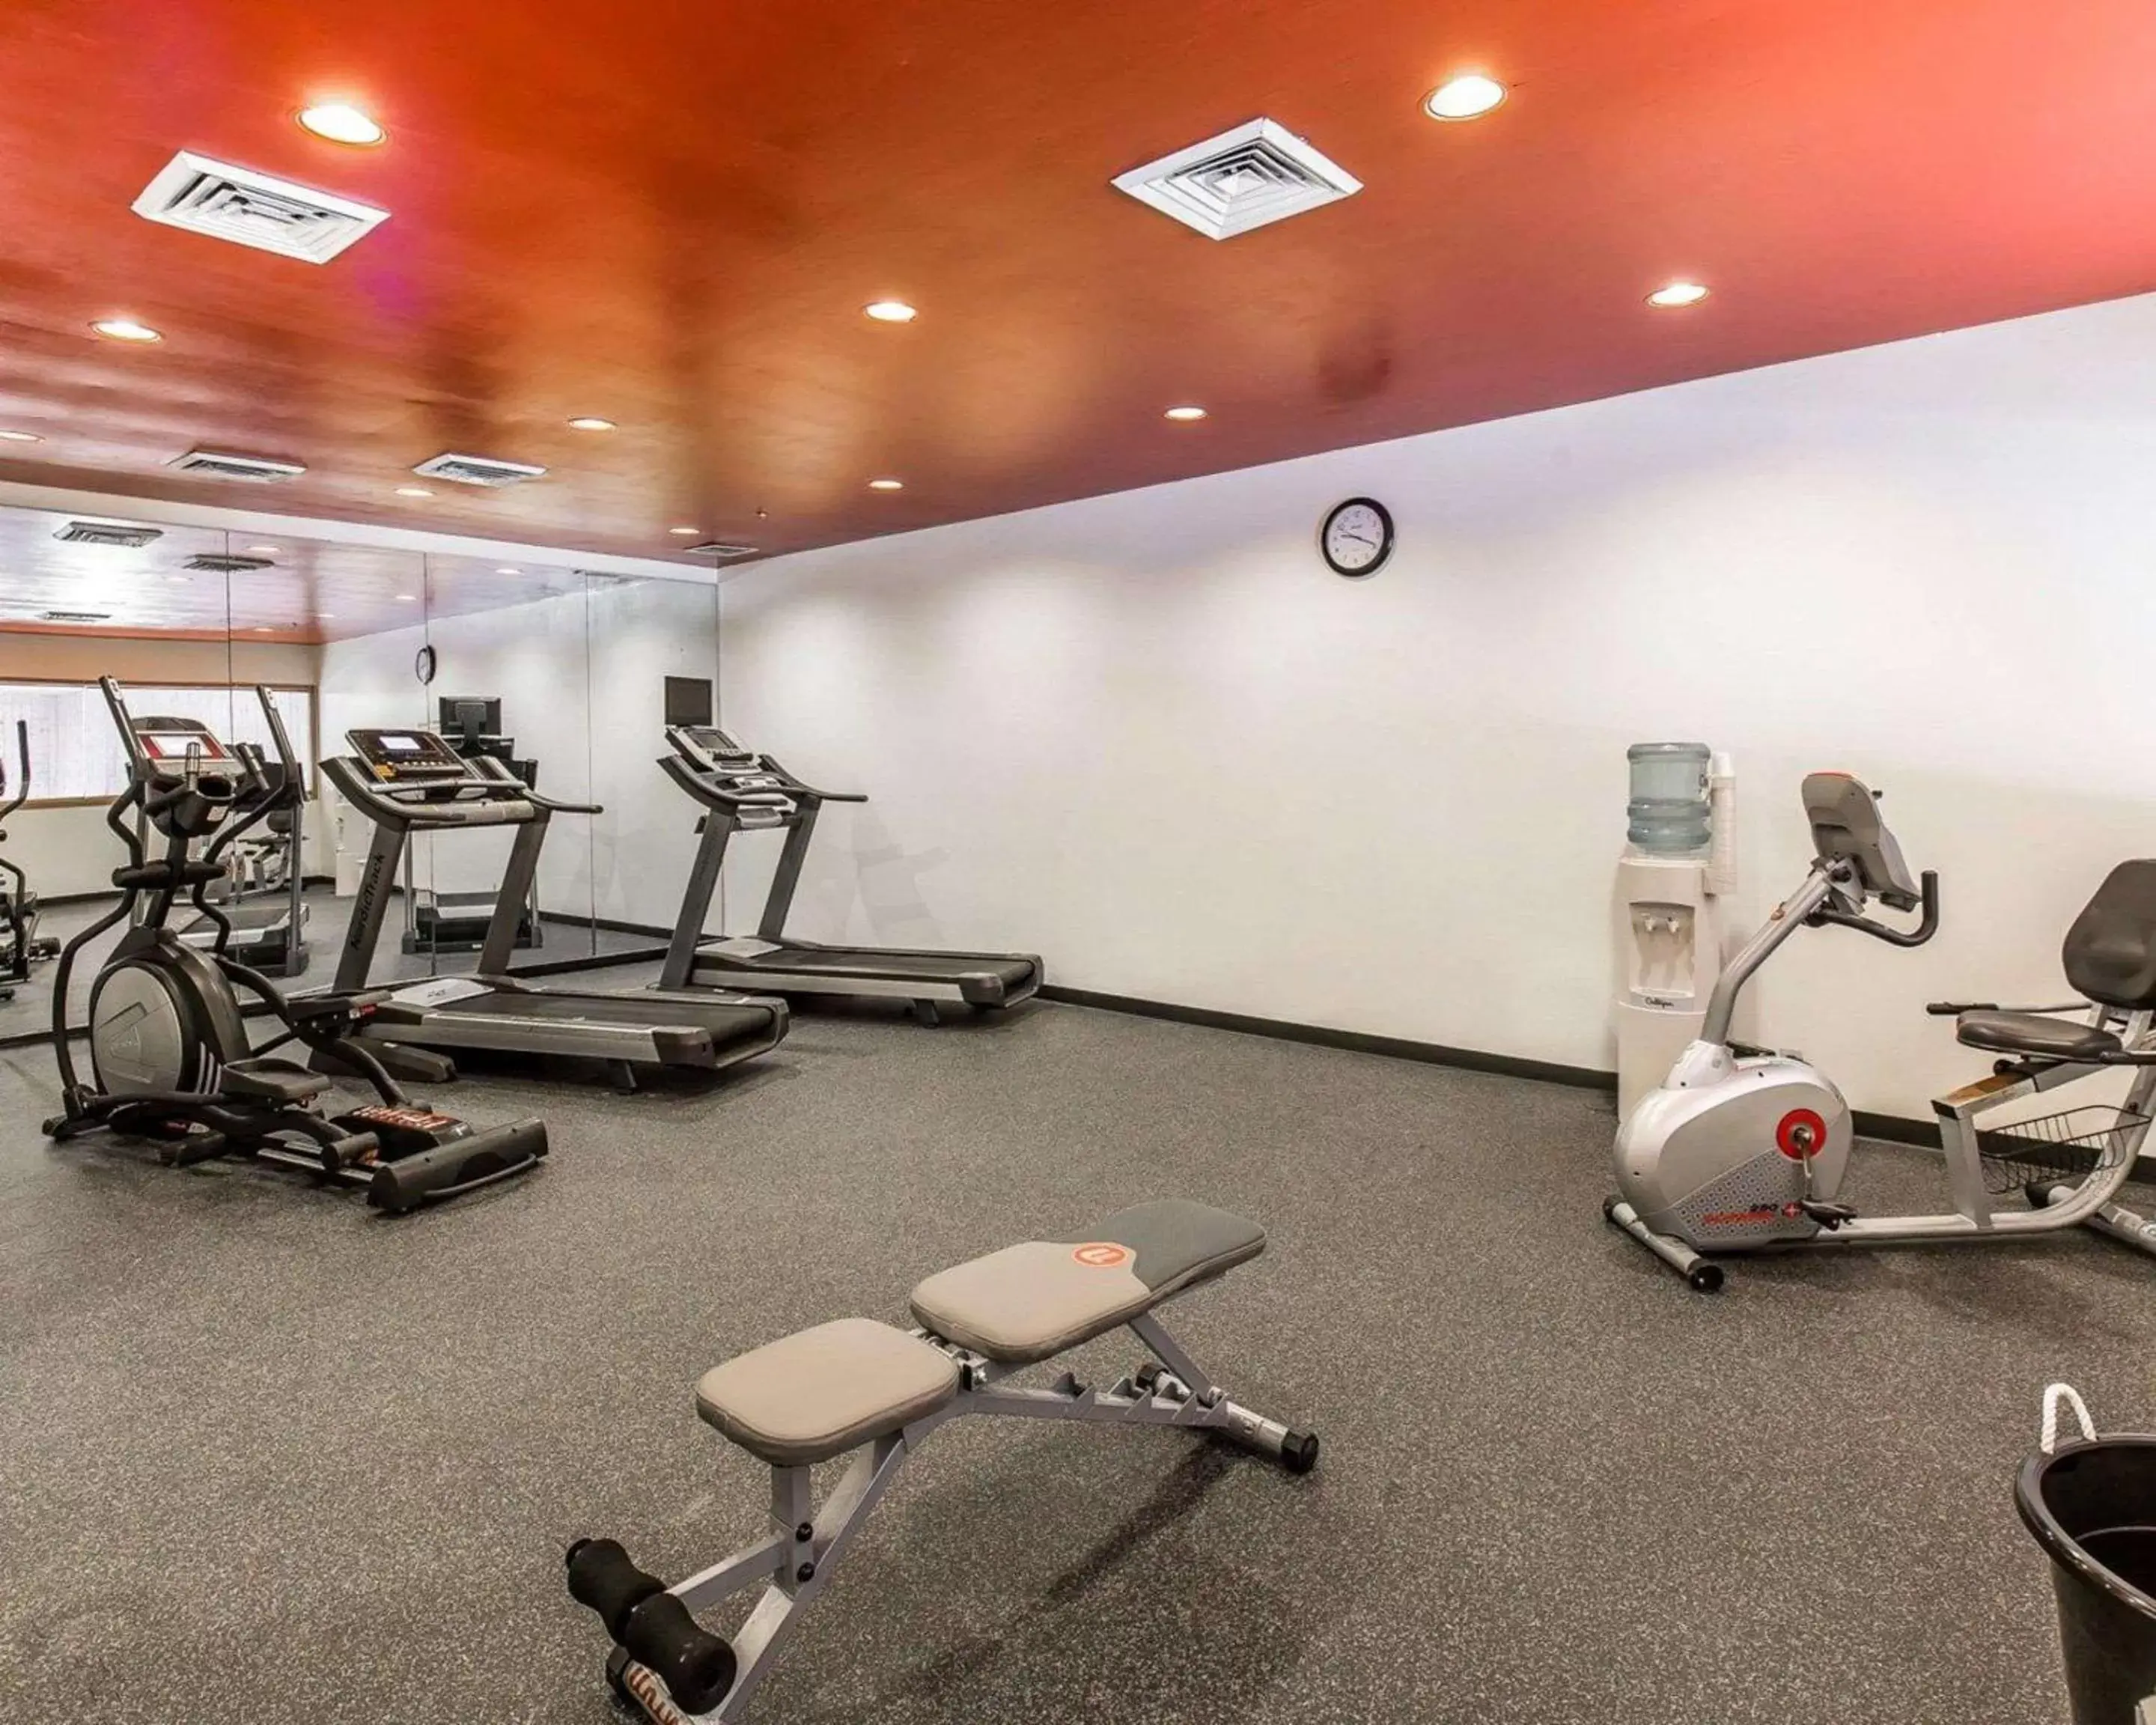 Fitness centre/facilities, Fitness Center/Facilities in Quality Suites Moab near Arches National Park